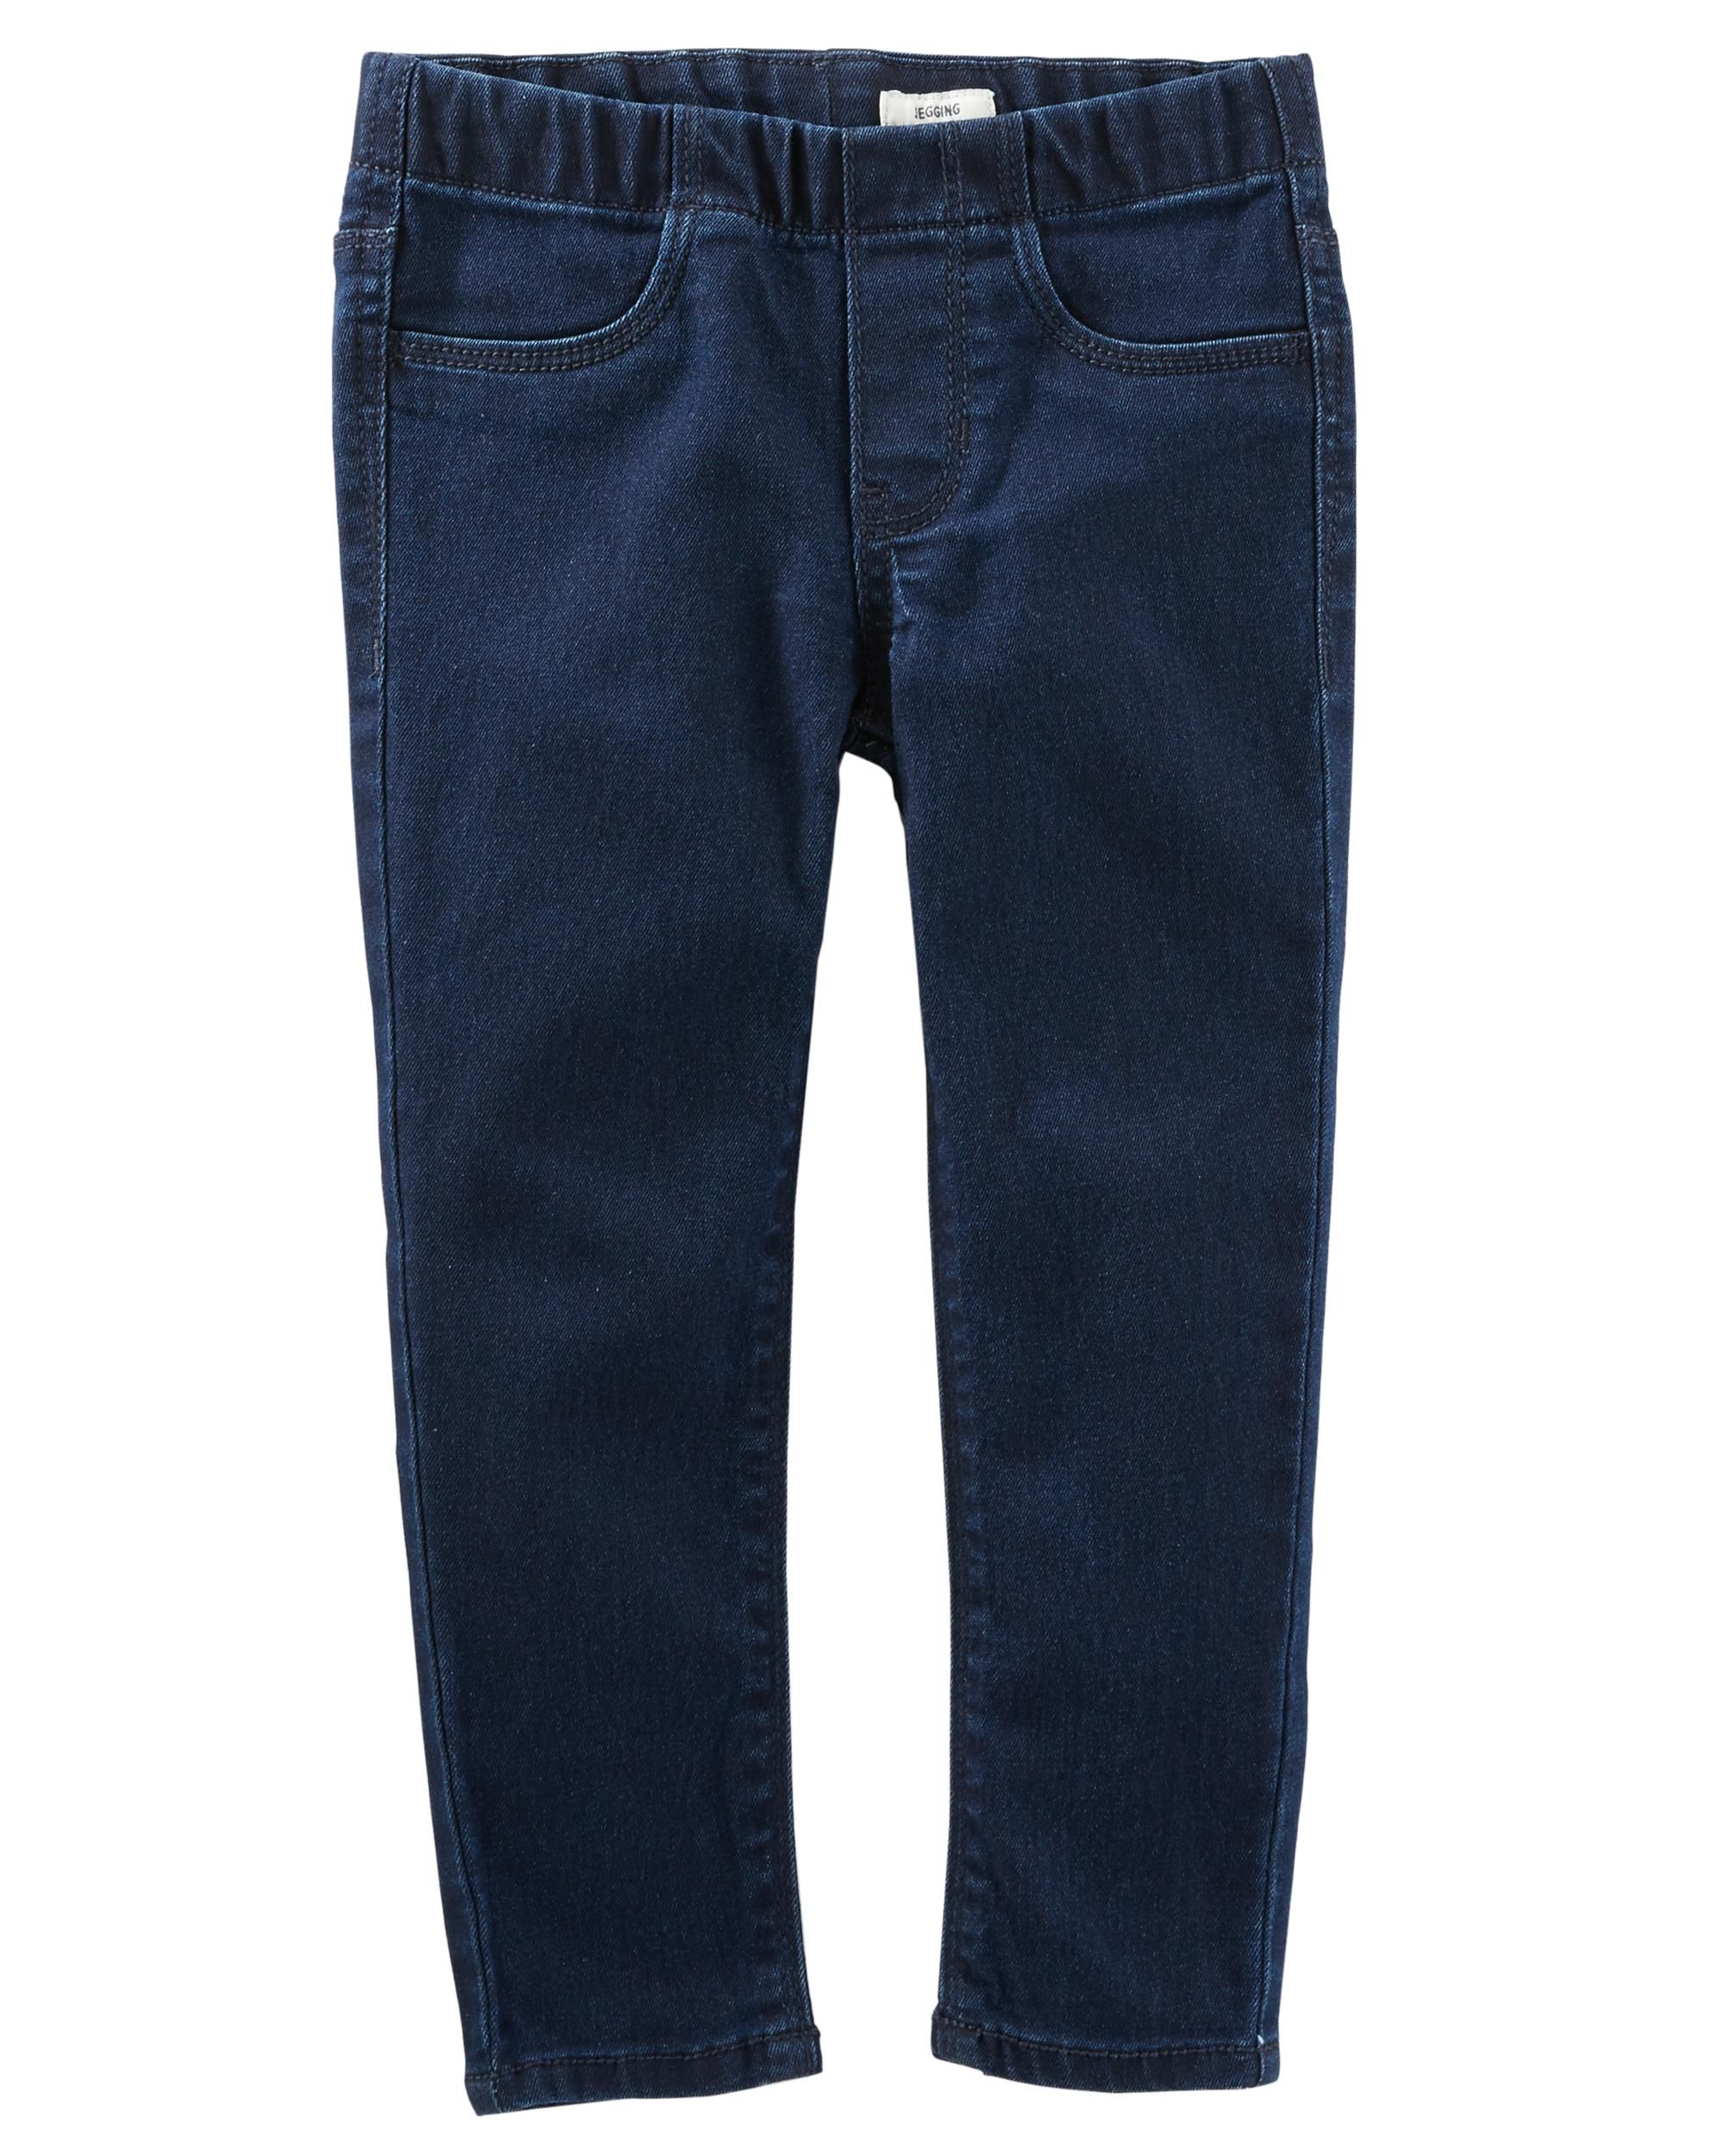 Pull-On Jeggings - Cornwall Wash | Carter's